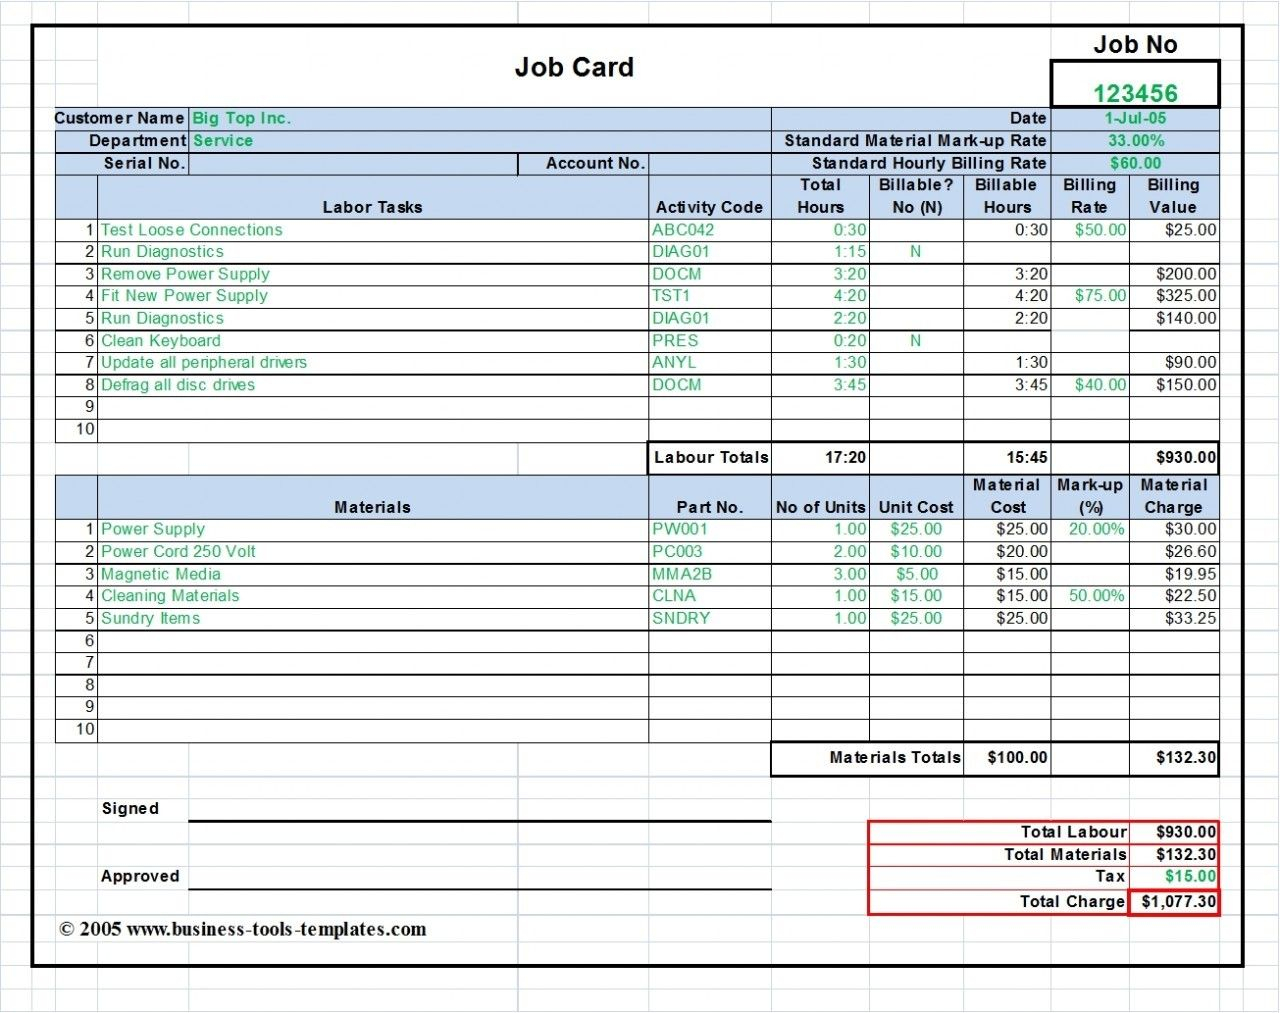 Workshop Job Card Template Excel, Labor & Material Cost Pertaining To Construction Cost Report Template